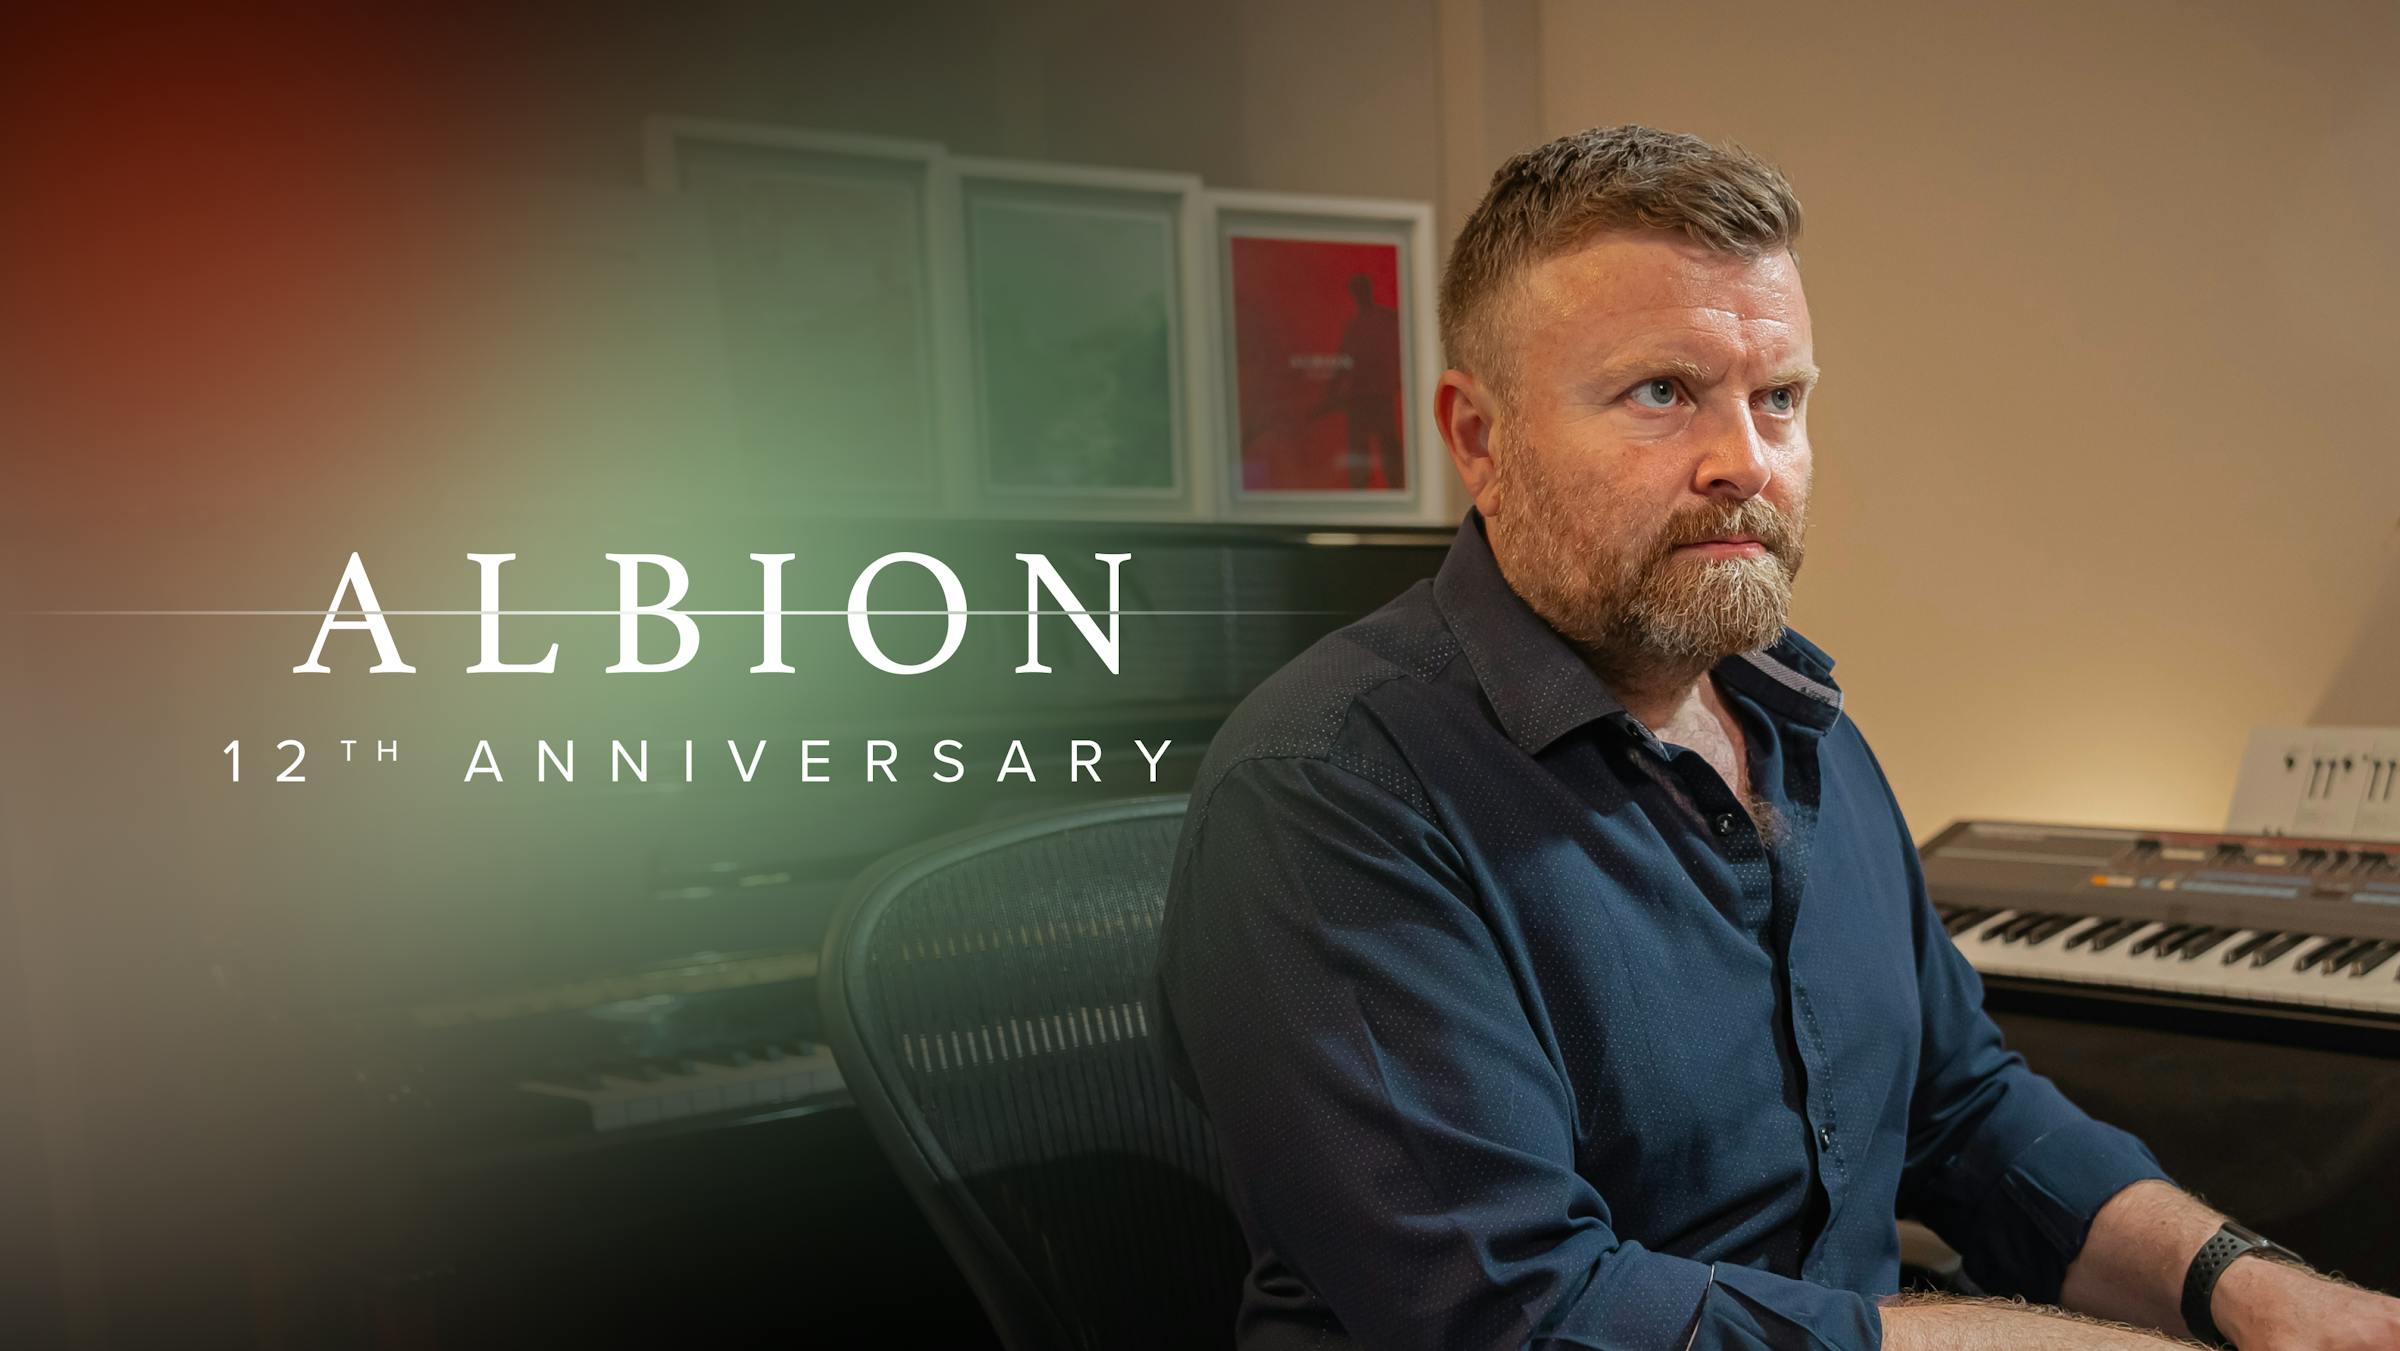 Paul Thomson sat at desk. Text reads "Albion 12th anniversary".